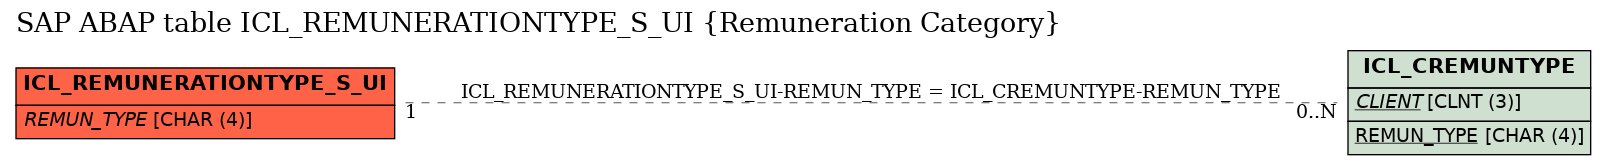 E-R Diagram for table ICL_REMUNERATIONTYPE_S_UI (Remuneration Category)